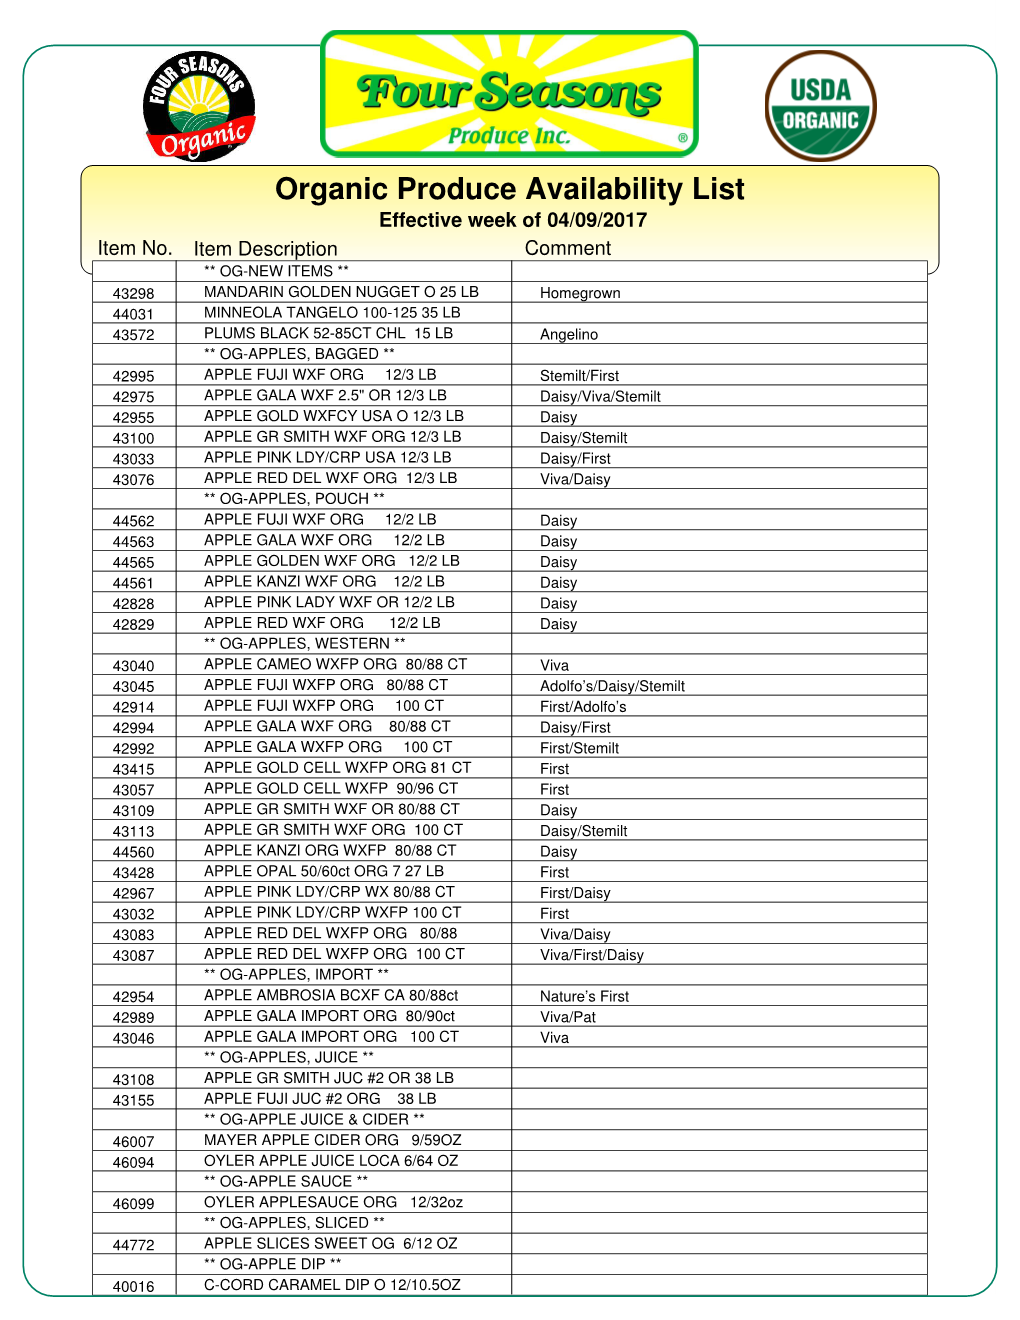 Organic SEASONS PRODUCE/Organicsproduce Availability Attention: List 04/06/17 to 04/06/17 Effective Week of 04/09/2017